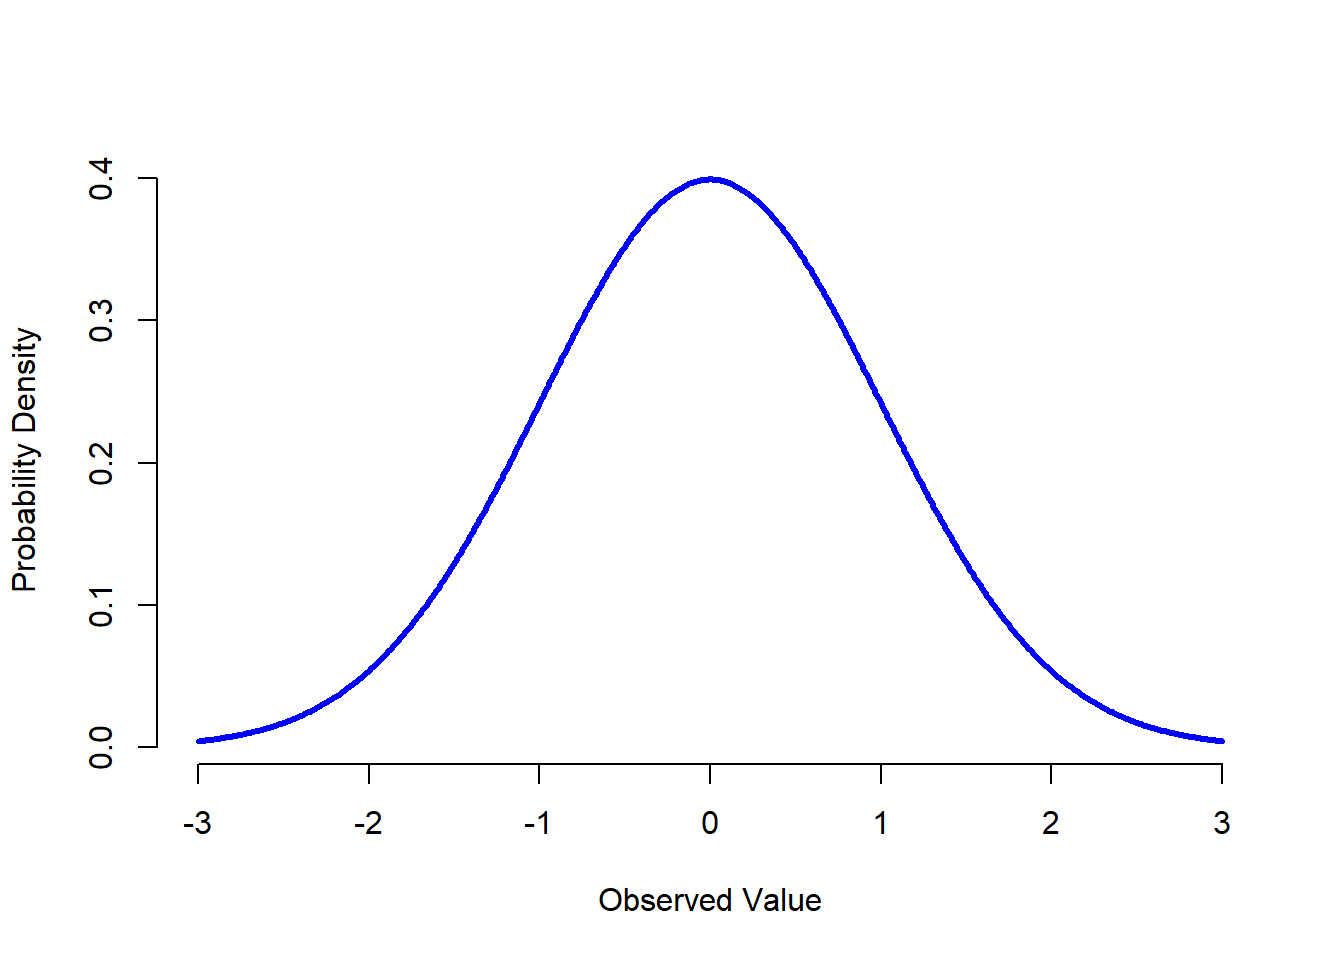 {The normal distribution with mean $mu = 0$ and standard deviation $sigma = 1$. The $x$-axis corresponds to the value of some variable, and the $y$-axis tells us something about how likely we are to observe that value. However, notice that the $y$-axis is labelled "Probability Density" and not "Probability". There is a subtle and somewhat frustrating characteristic of continuous distributions that makes the $y$ axis behave a bit oddly: the height of the curve here isn't actually the probability of observing a particular $x$ value. On the other hand, it *is* true that the heights of the curve tells you which $x$ values are more likely (the higher ones!).